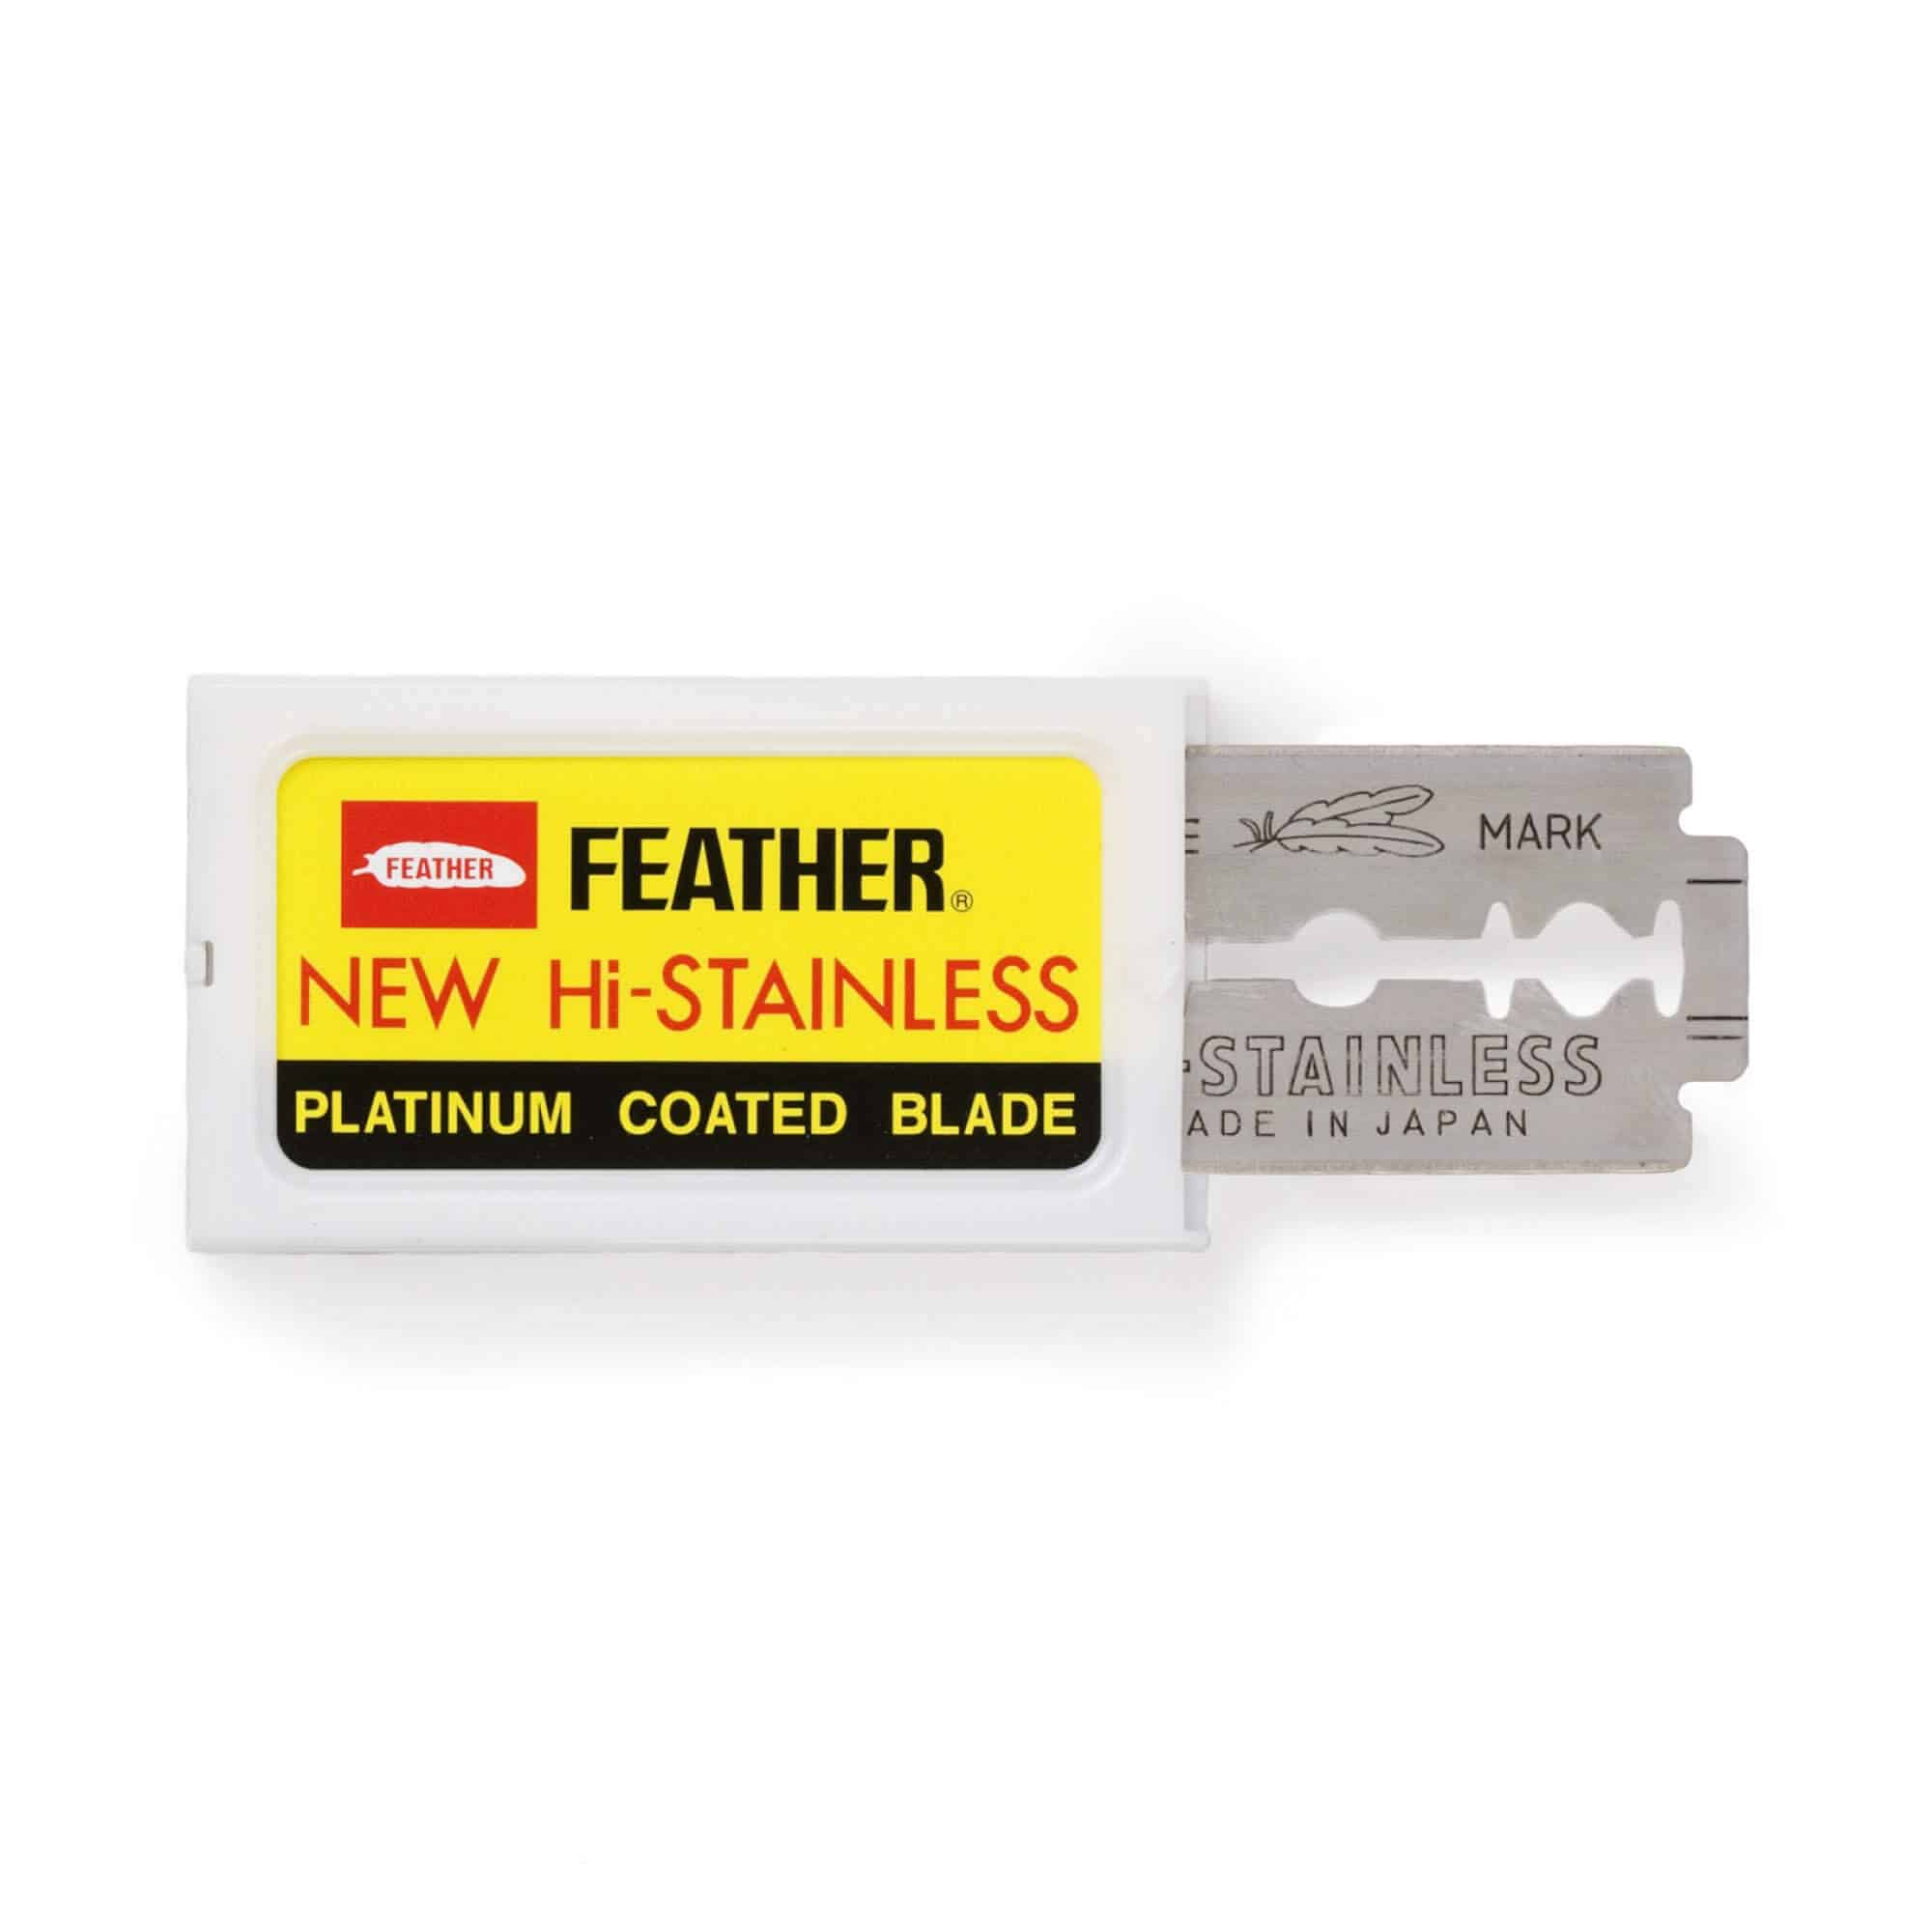 My first choice in blades is Feather